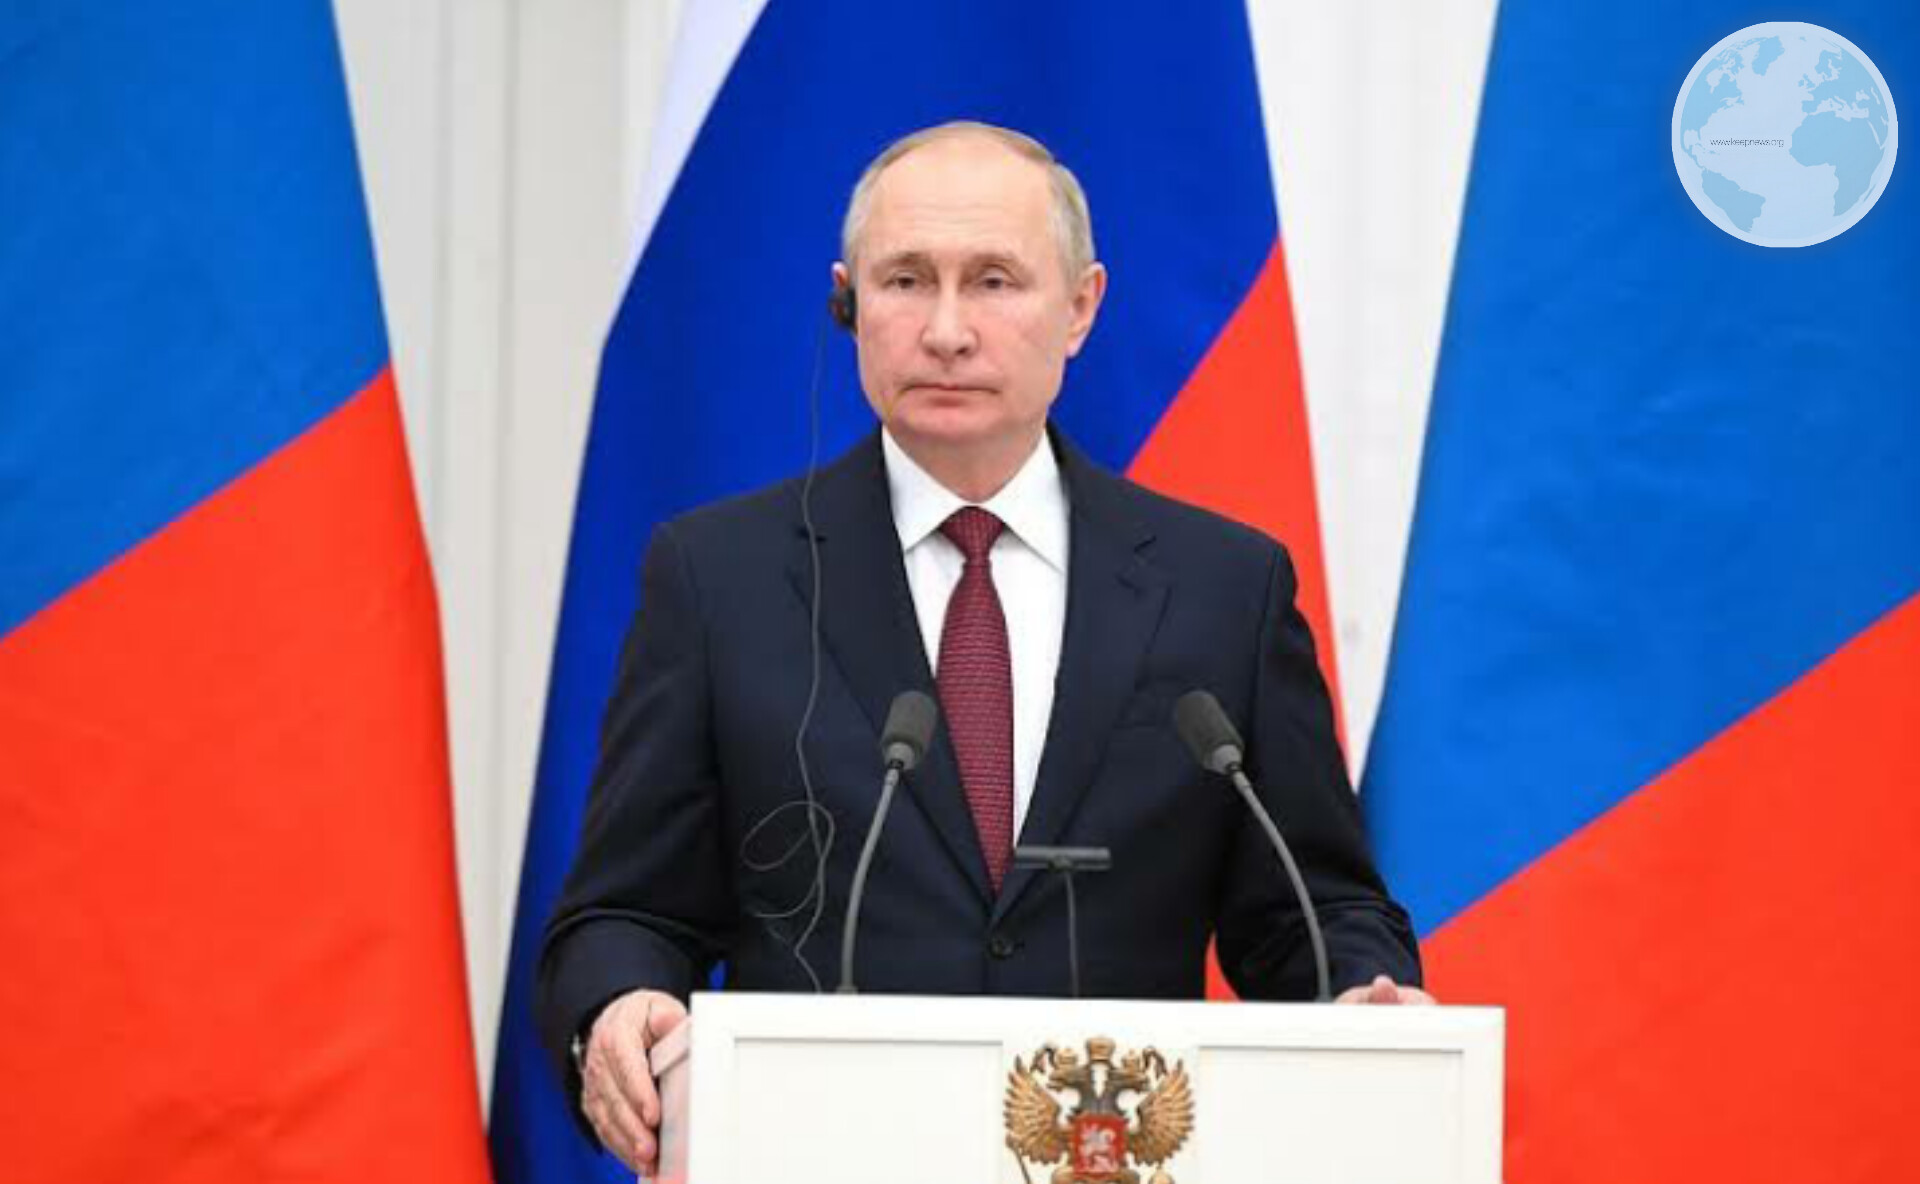 Putin said Russia does not Want any War